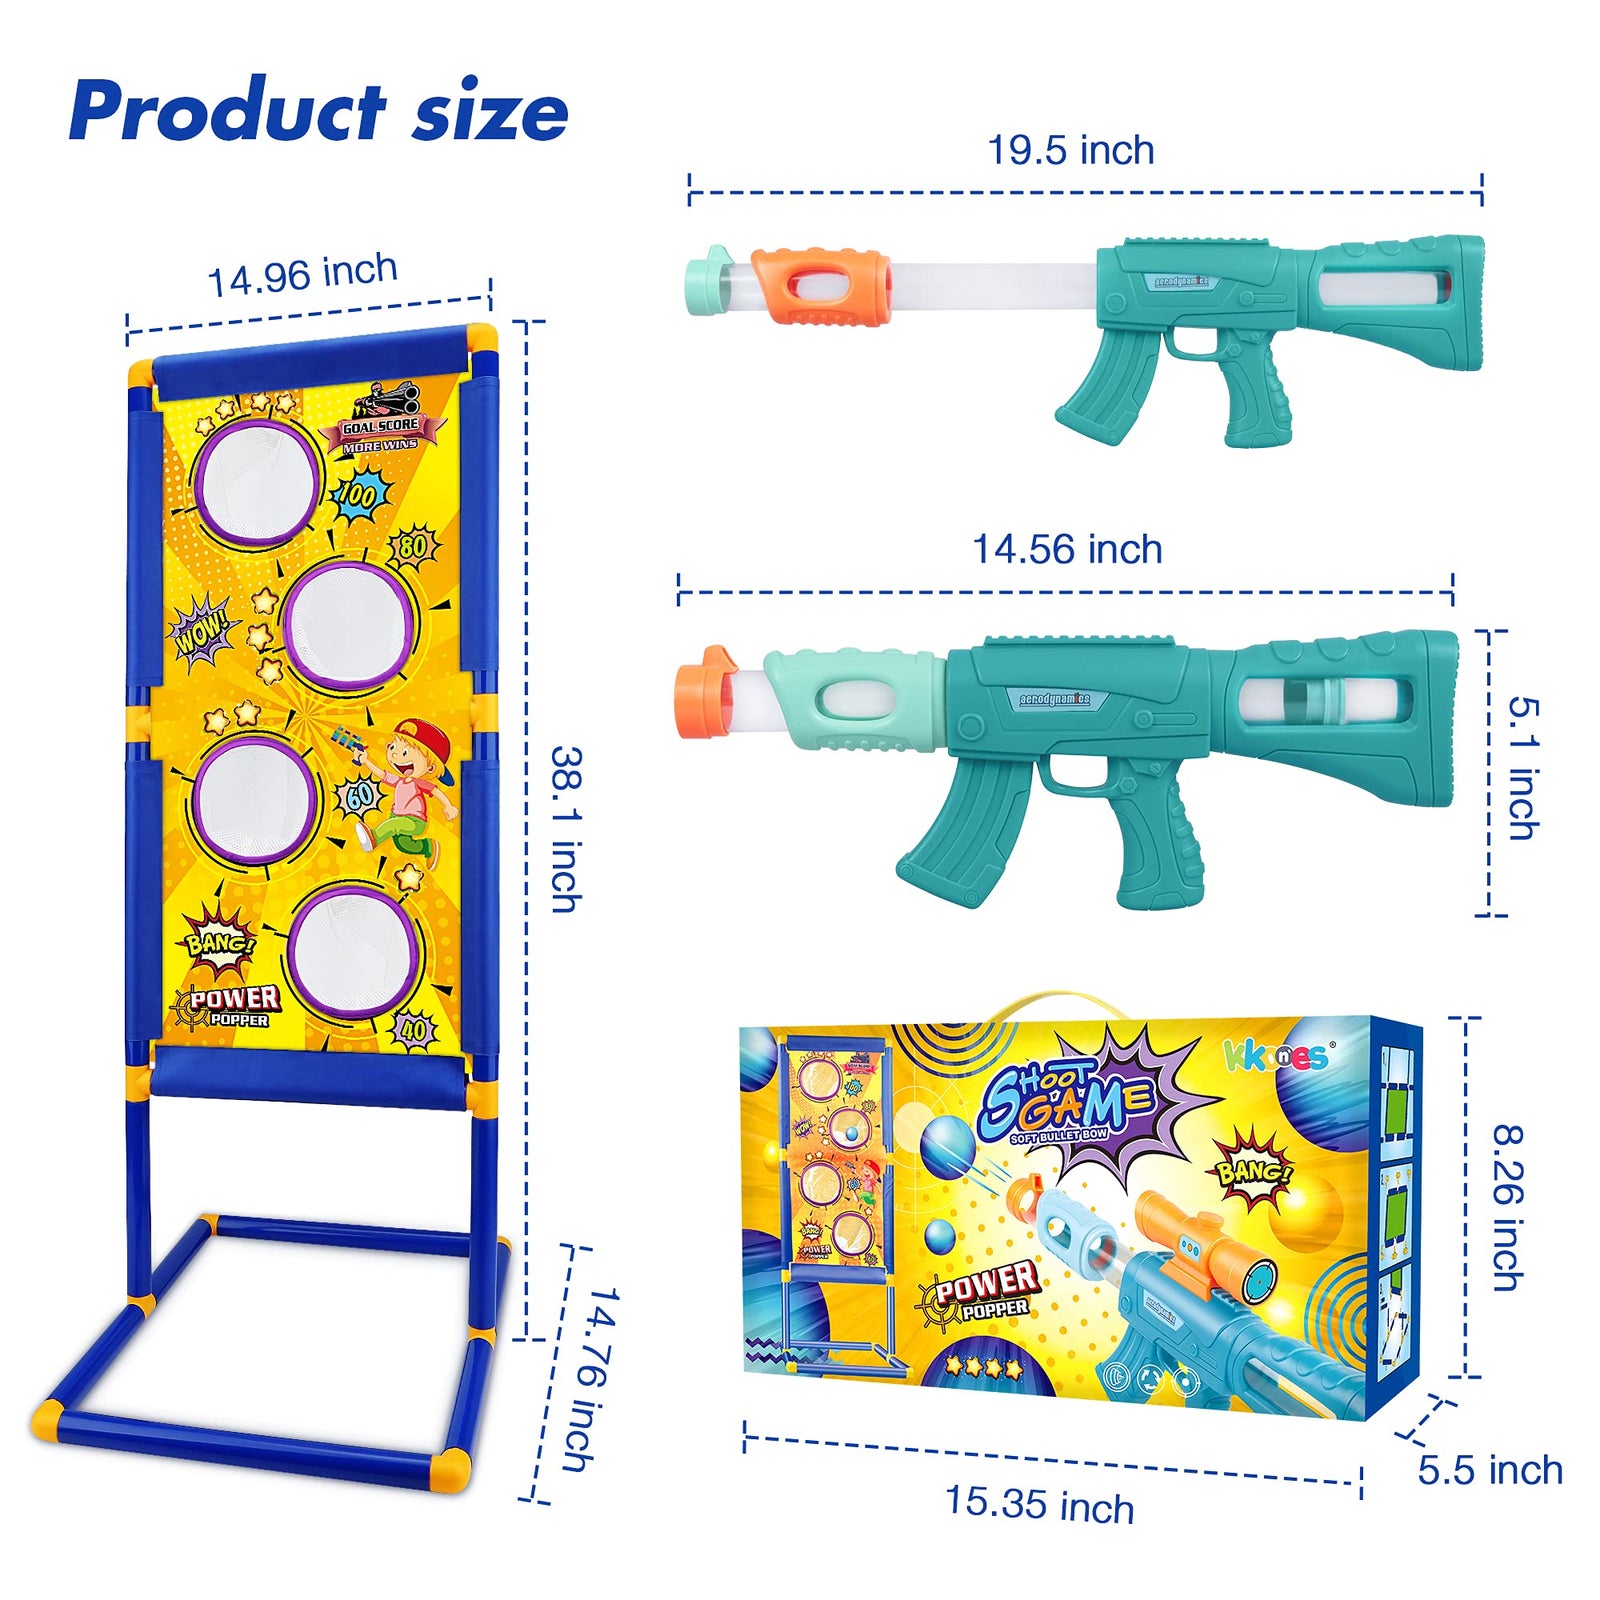 Shooting Game Toy for Boys - 2 Player Toy Foam Blaster Air Guns, 24 Foam Bullet Balls Popper & Standing Shooting Target, Birthday Gifts for Age 3 4 5 6 7 8 9 10-12 Years Old Kids, Girls